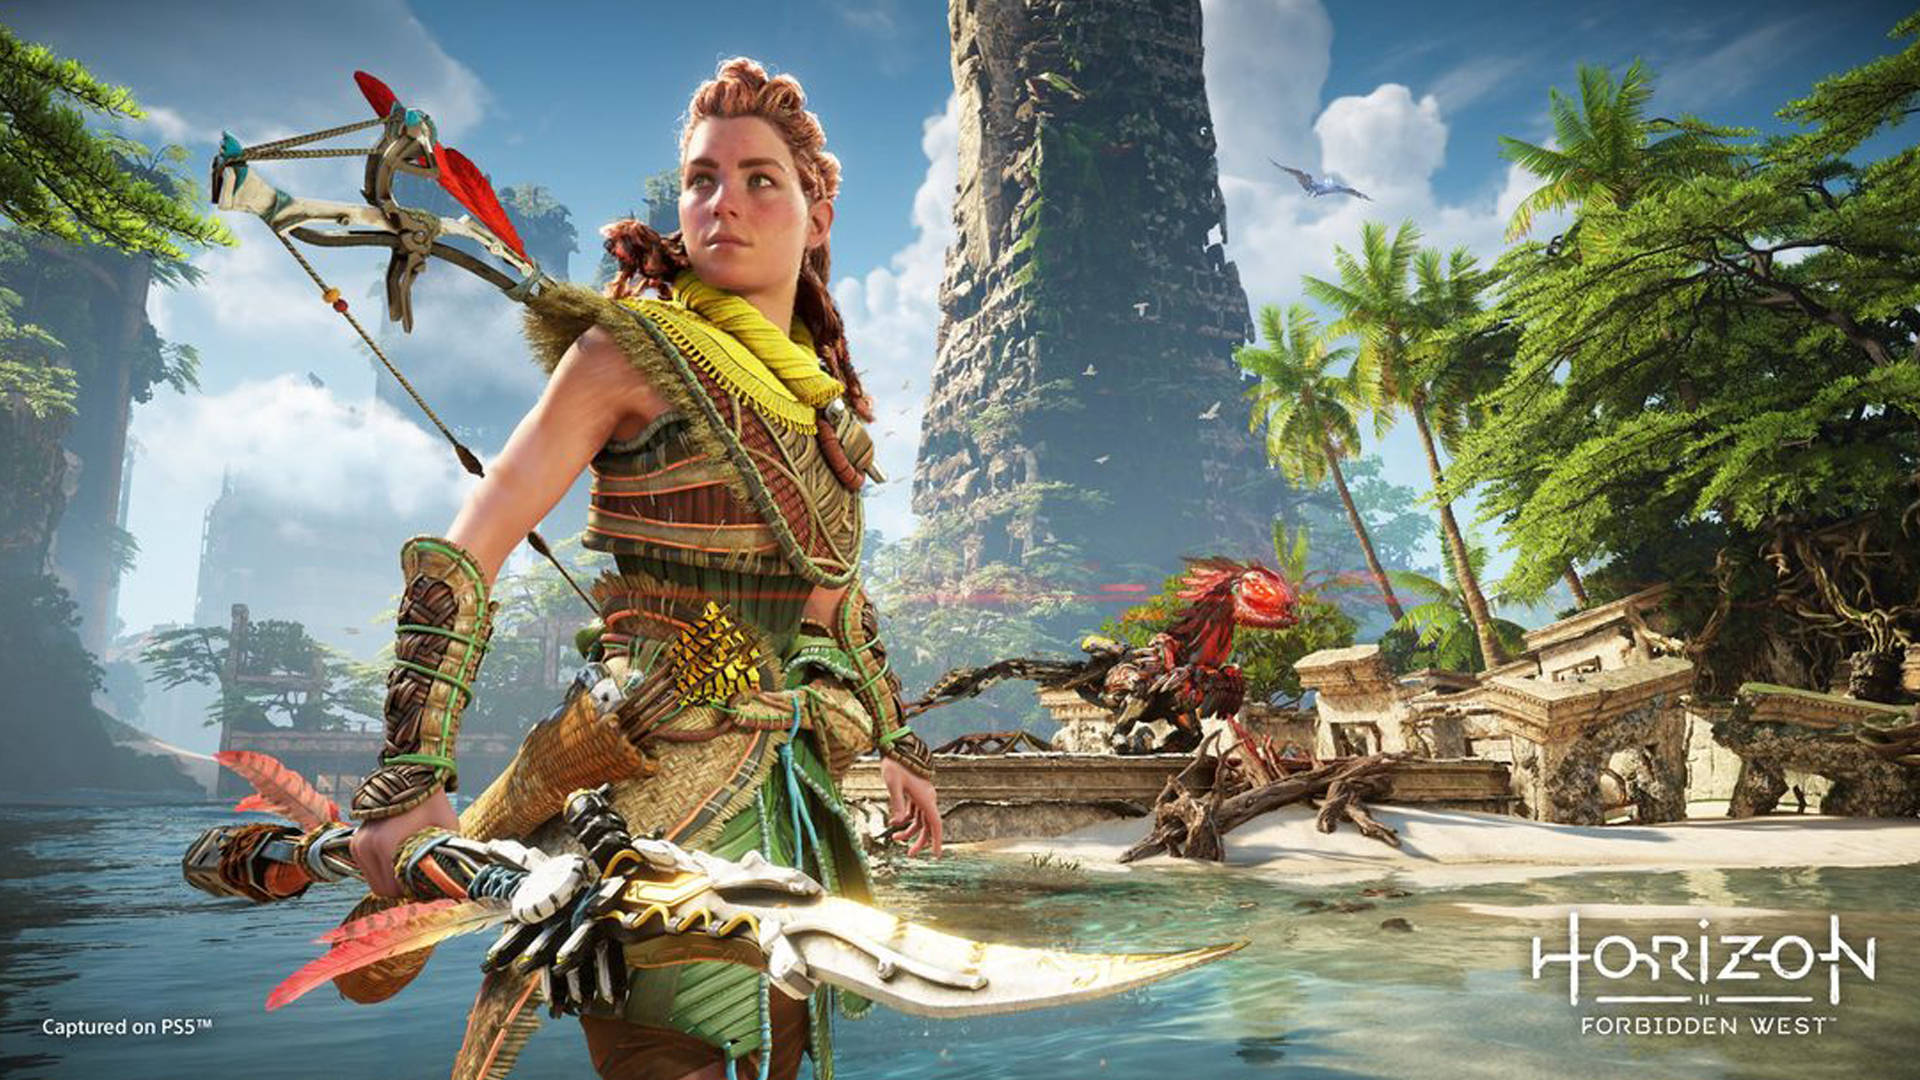 Things We Learned About Horizon Forbidden West Gameplay From The